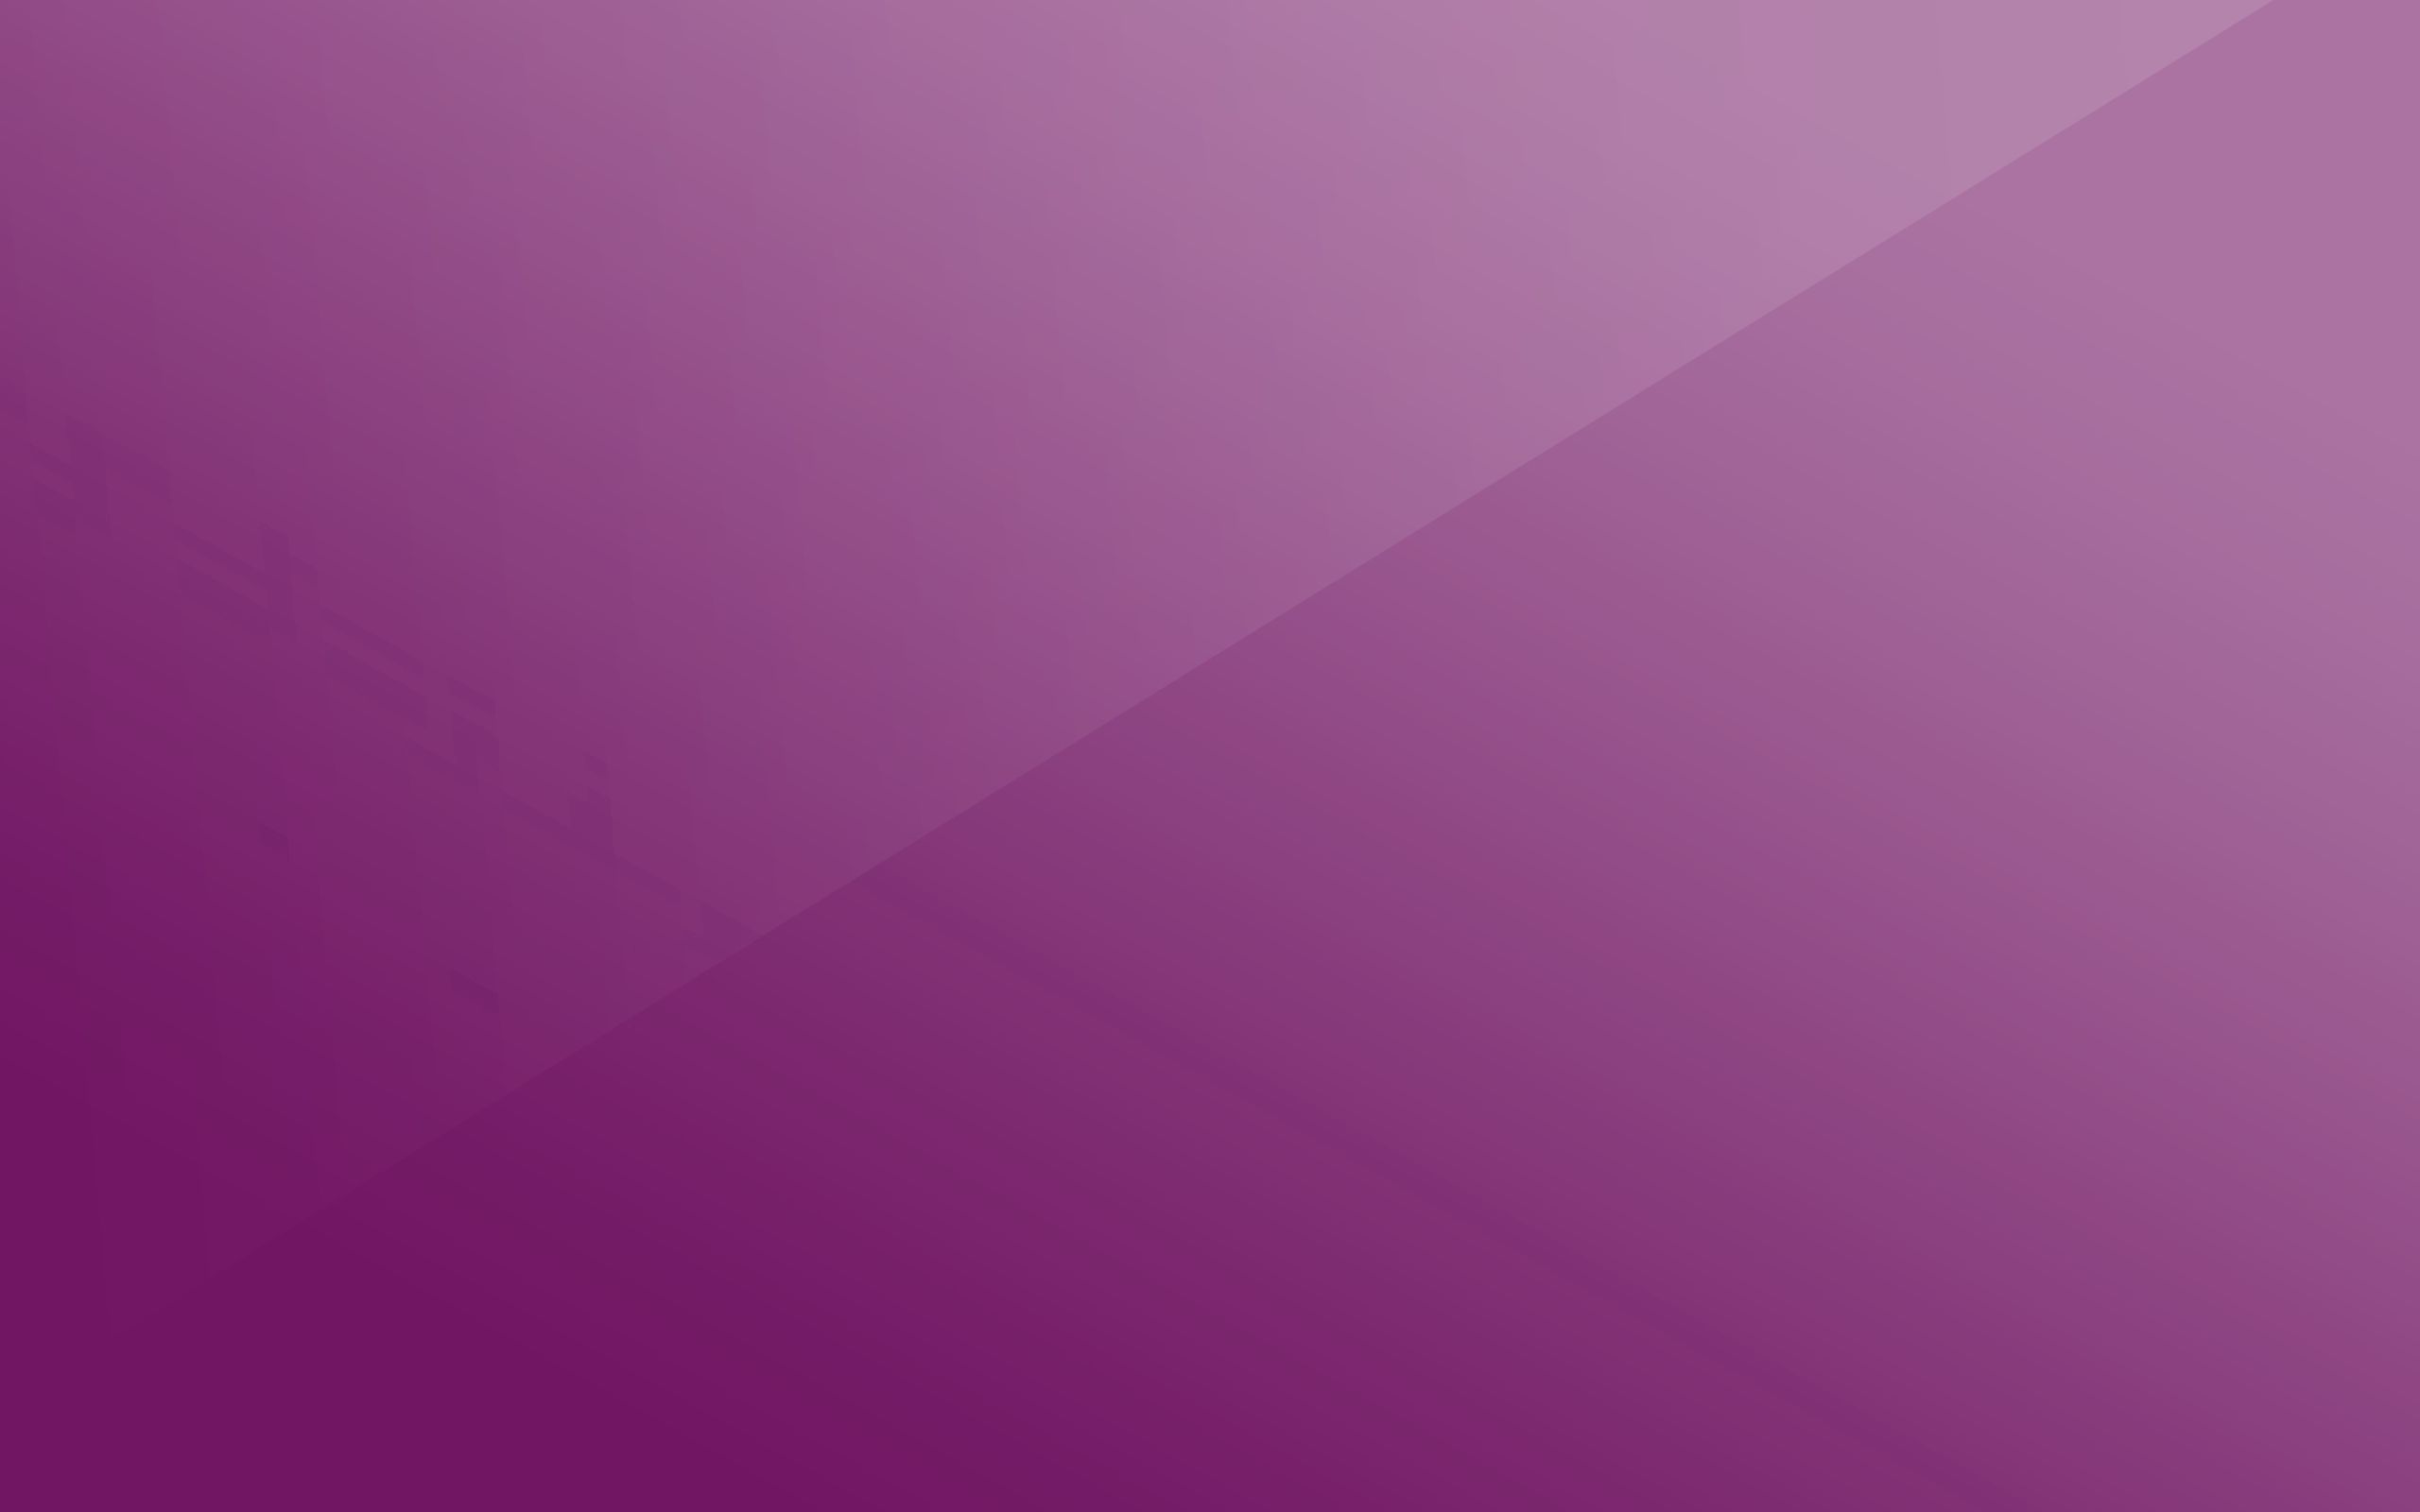 Mobile wallpaper purple, surface, abstract, background, violet, light, lines, light coloured